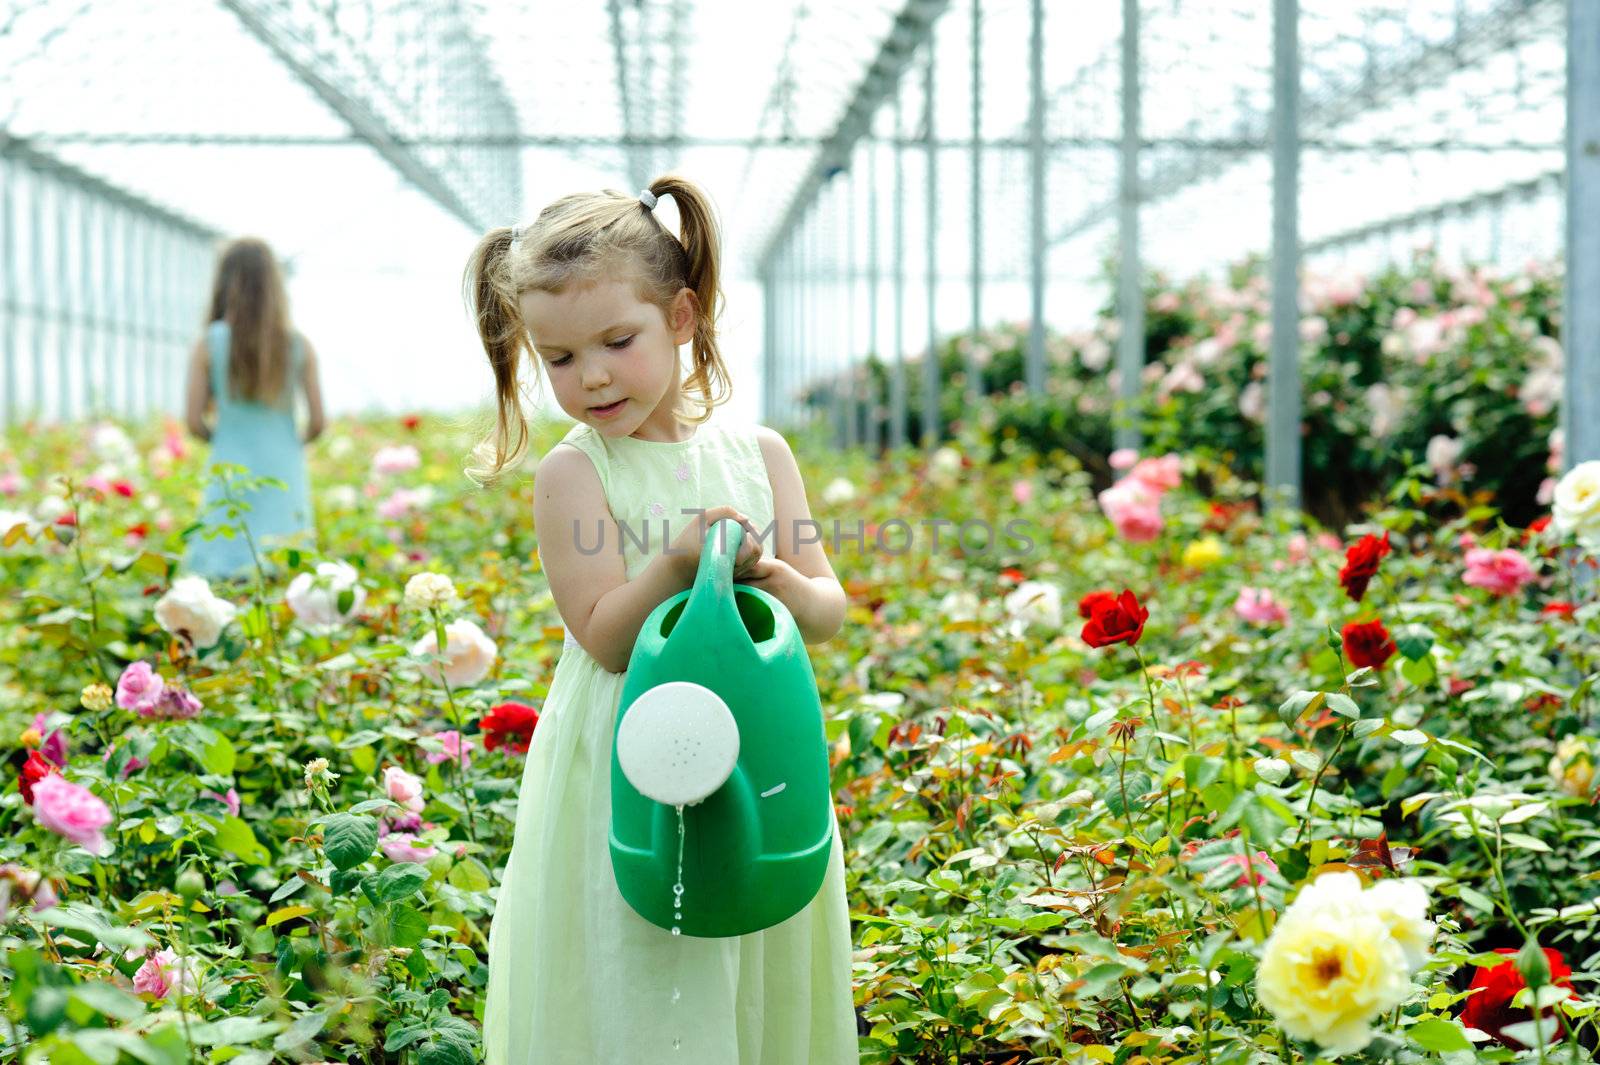 An image of a little girl watering flowers